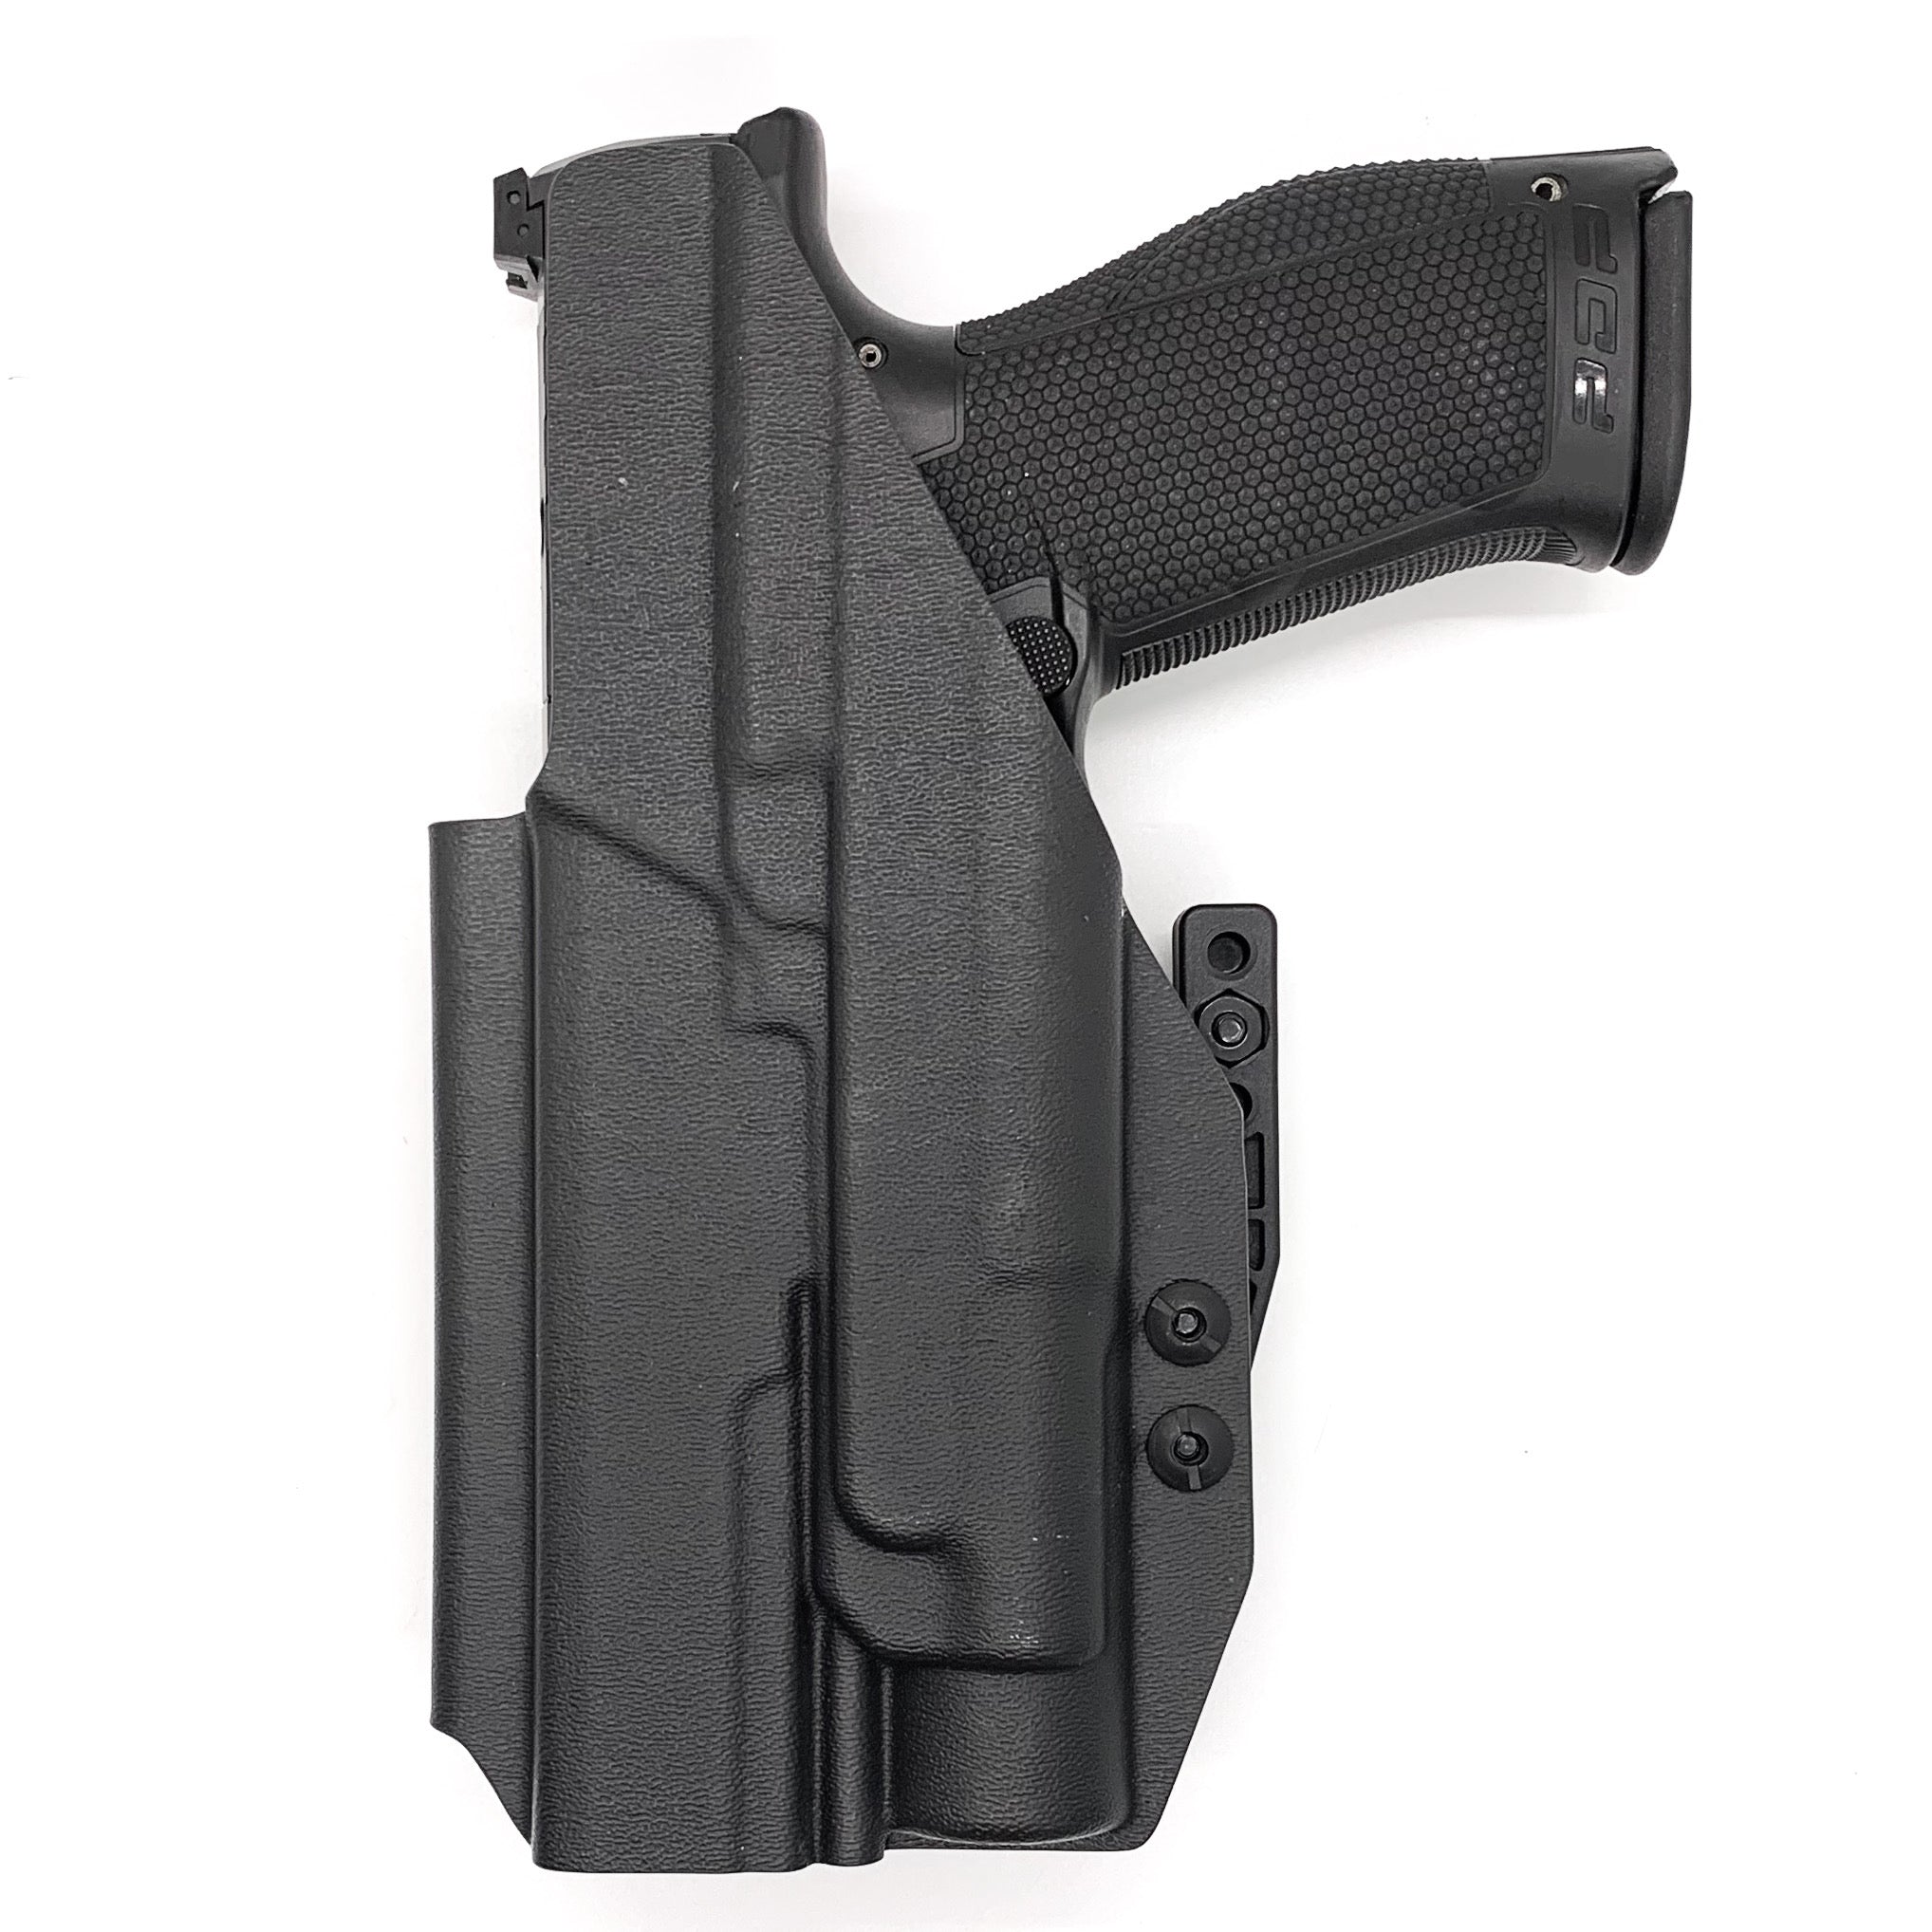 For the best concealed carry Inside Waistband IWB AIWB Holster designed to fit the Walther PDP 5" Full-Size pistol with the Streamlight TLR-1 or TLR-1HL mounted on the firearm, shop Four Brothers Holsters. Cut for red dot sight, full sweat guard, adjustable retention & open muzzle for threaded barrels & compensators